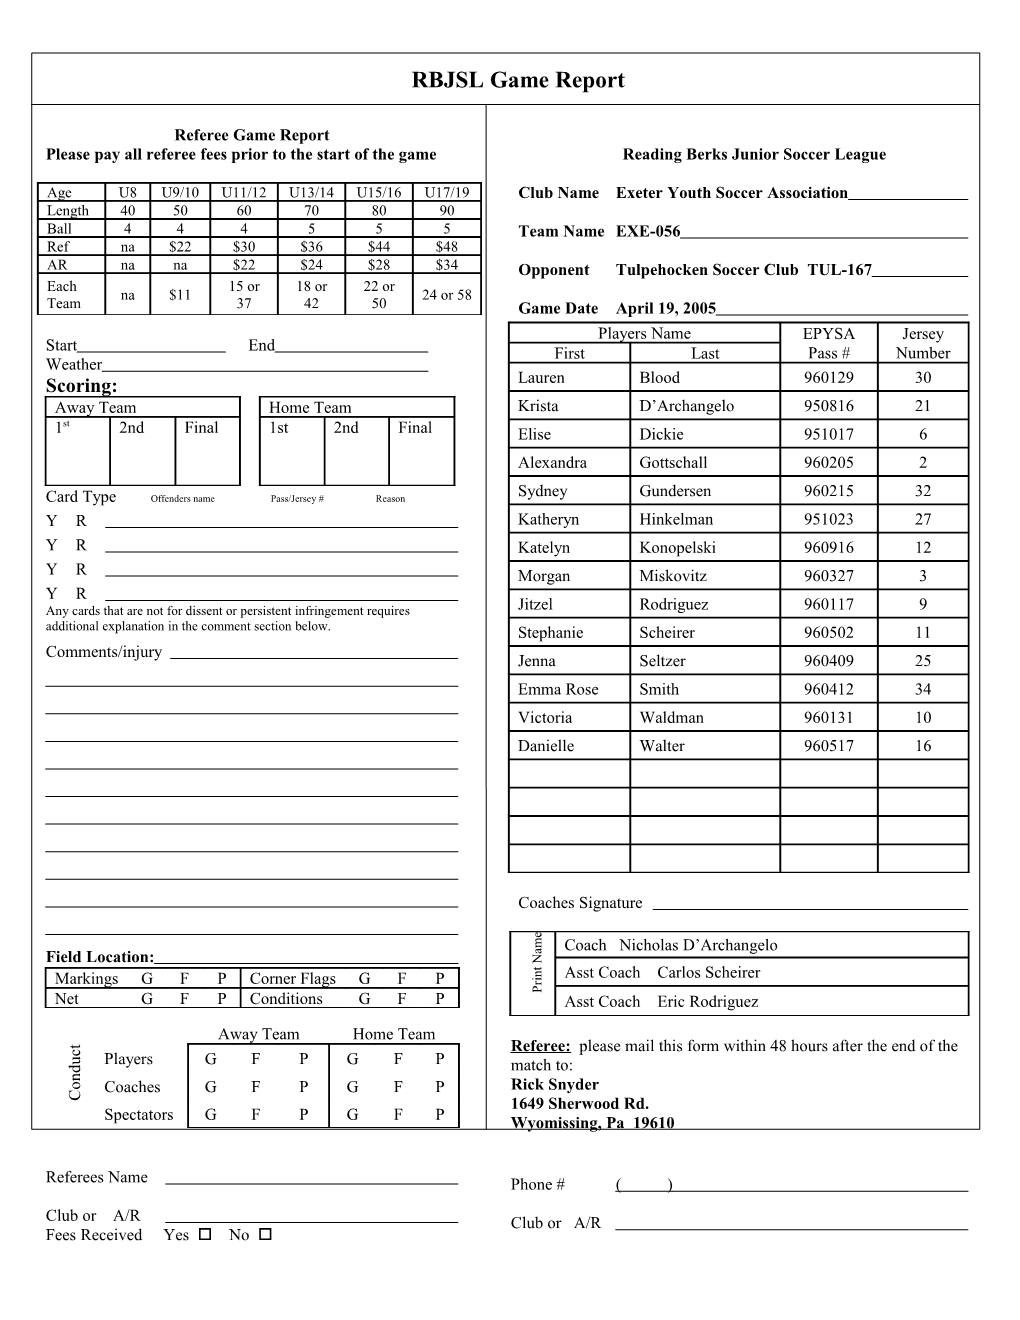 Referee Game Report